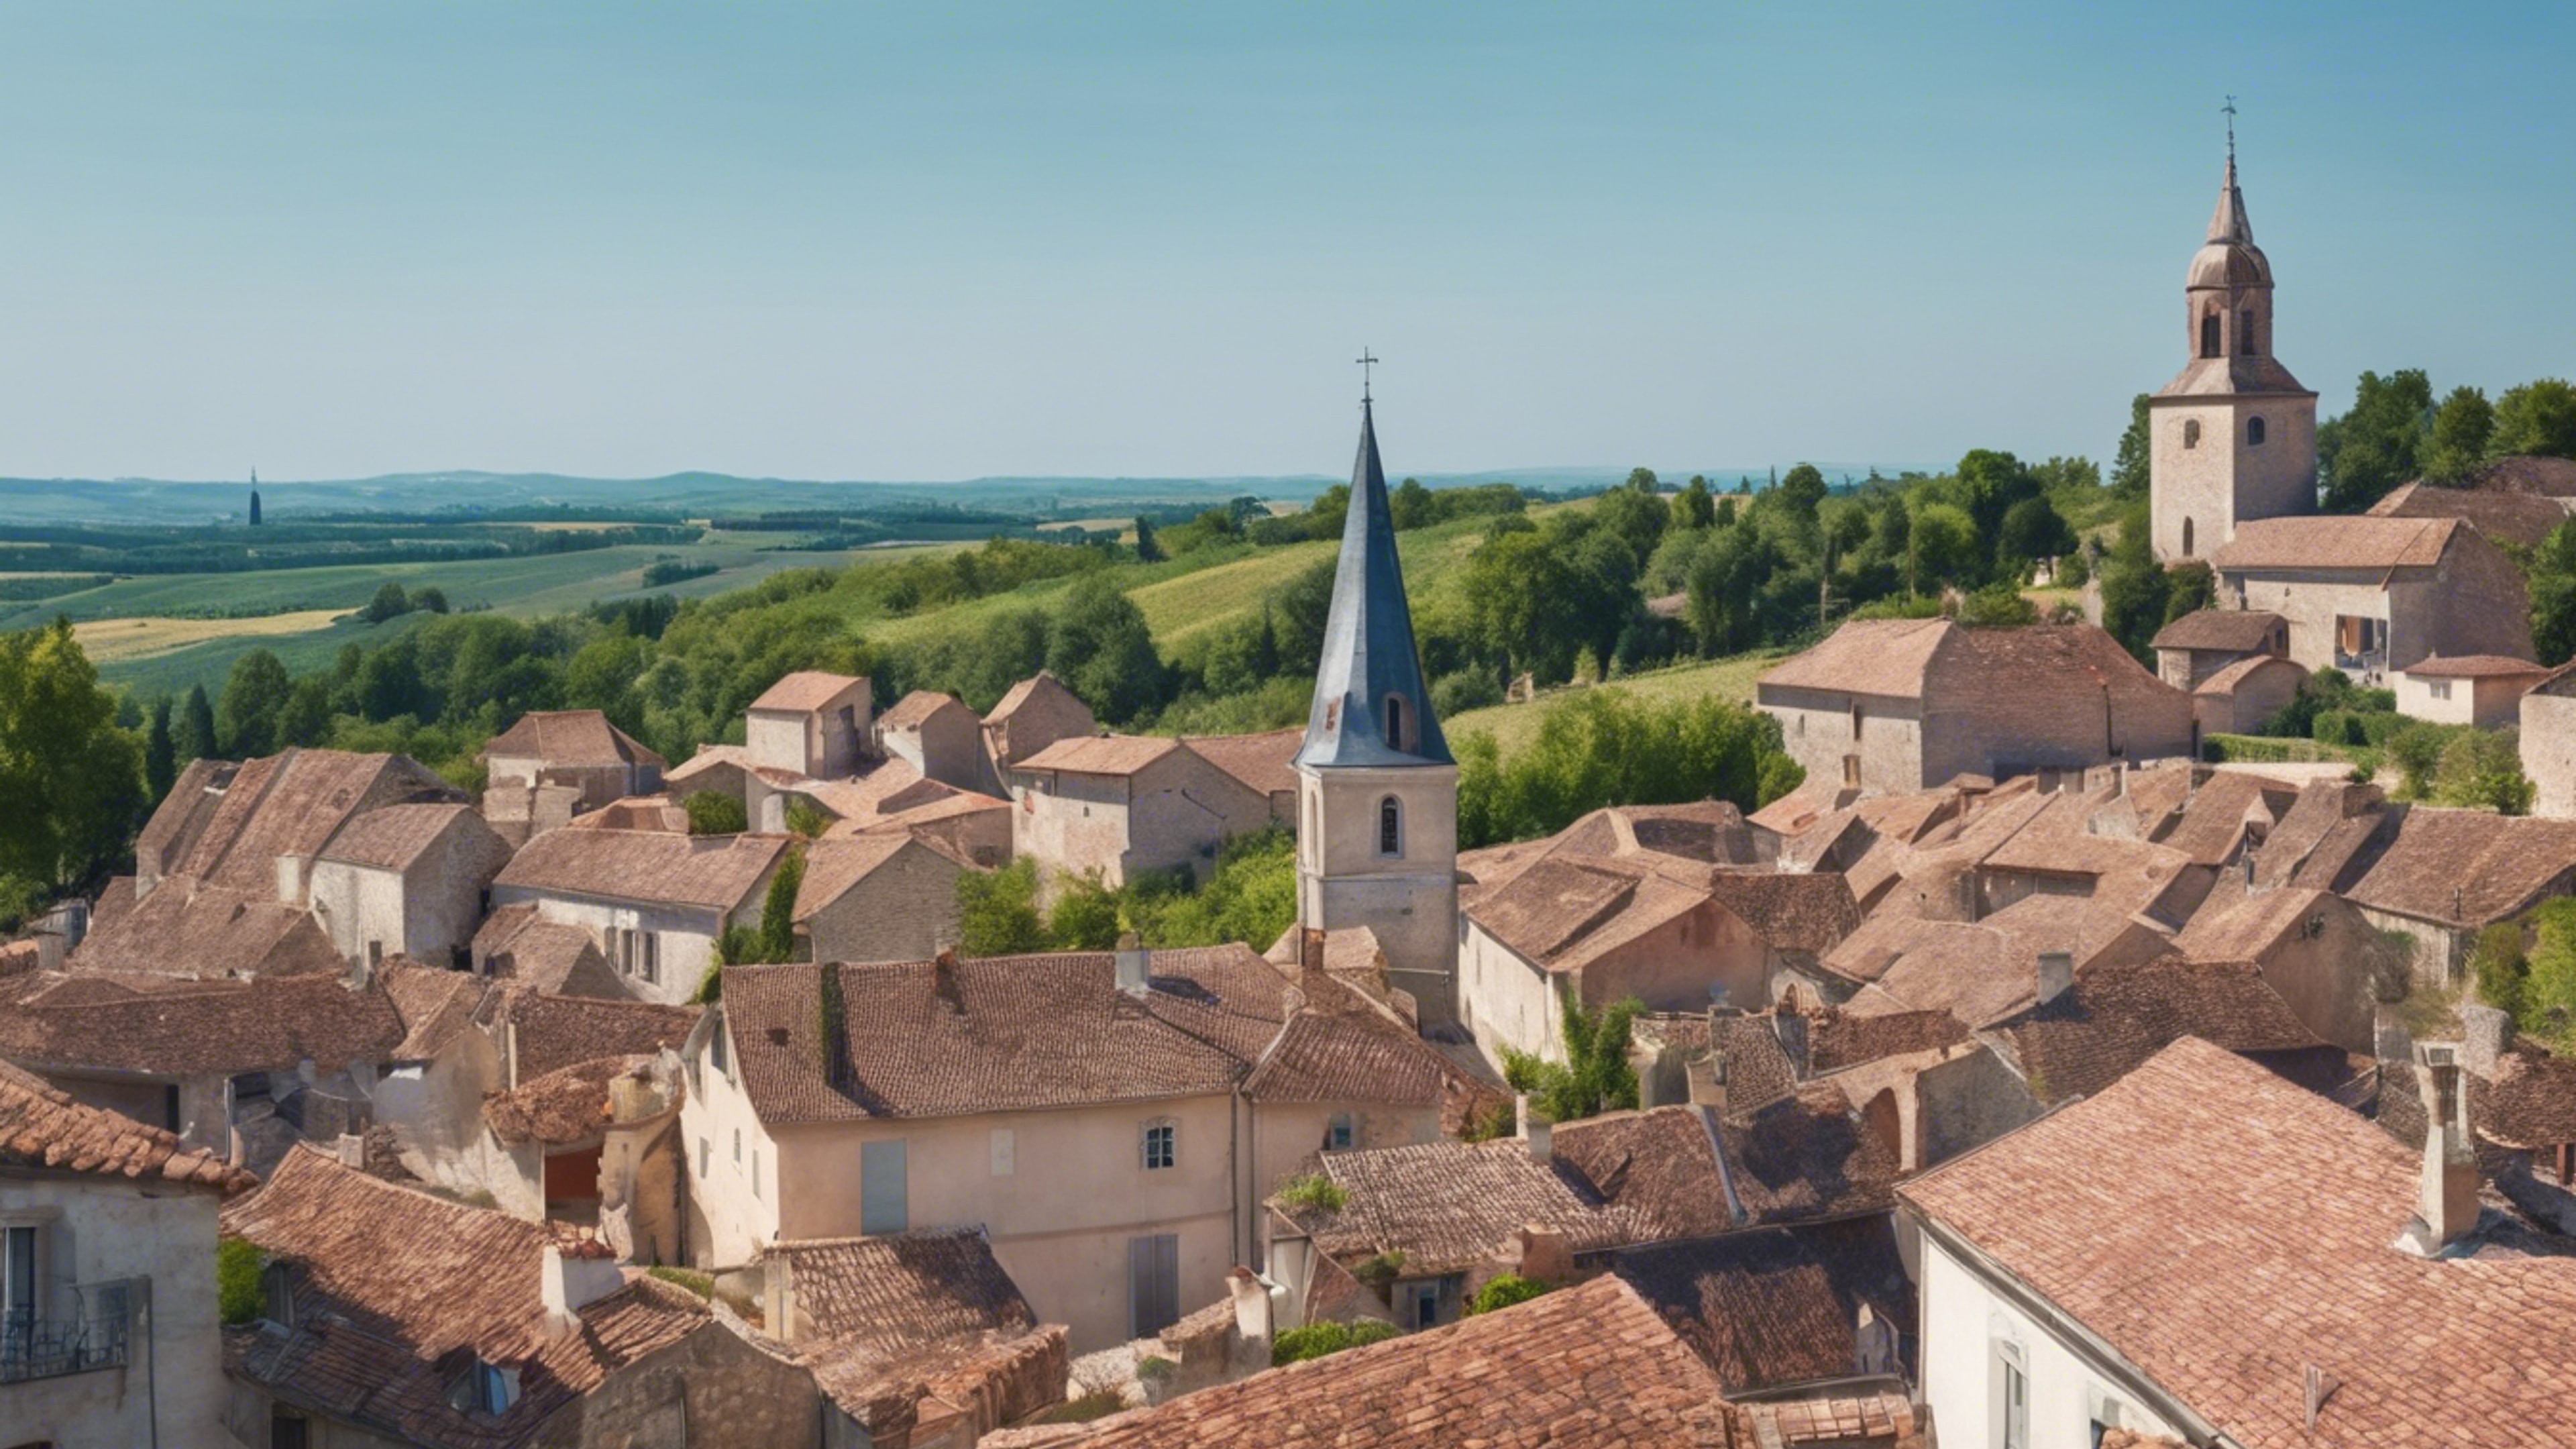 A panoramic view of a French country village with red-tiled roofs, a church spire, and surrounding vineyards under a clear blue sky. Wallpaper[29c4a00e876546cab0f2]